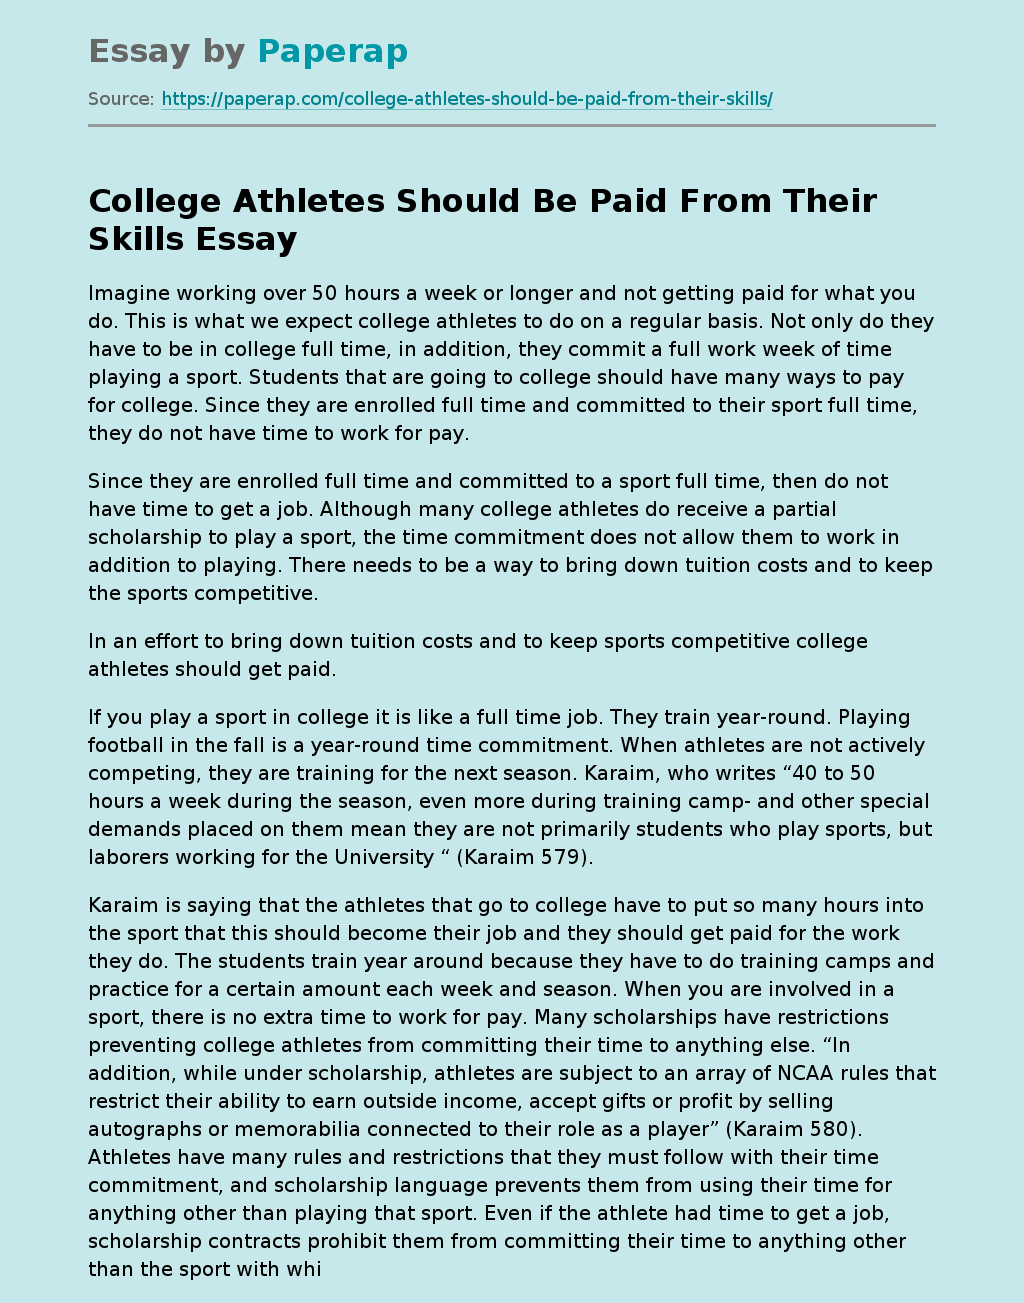 should college athletes be paid essay example